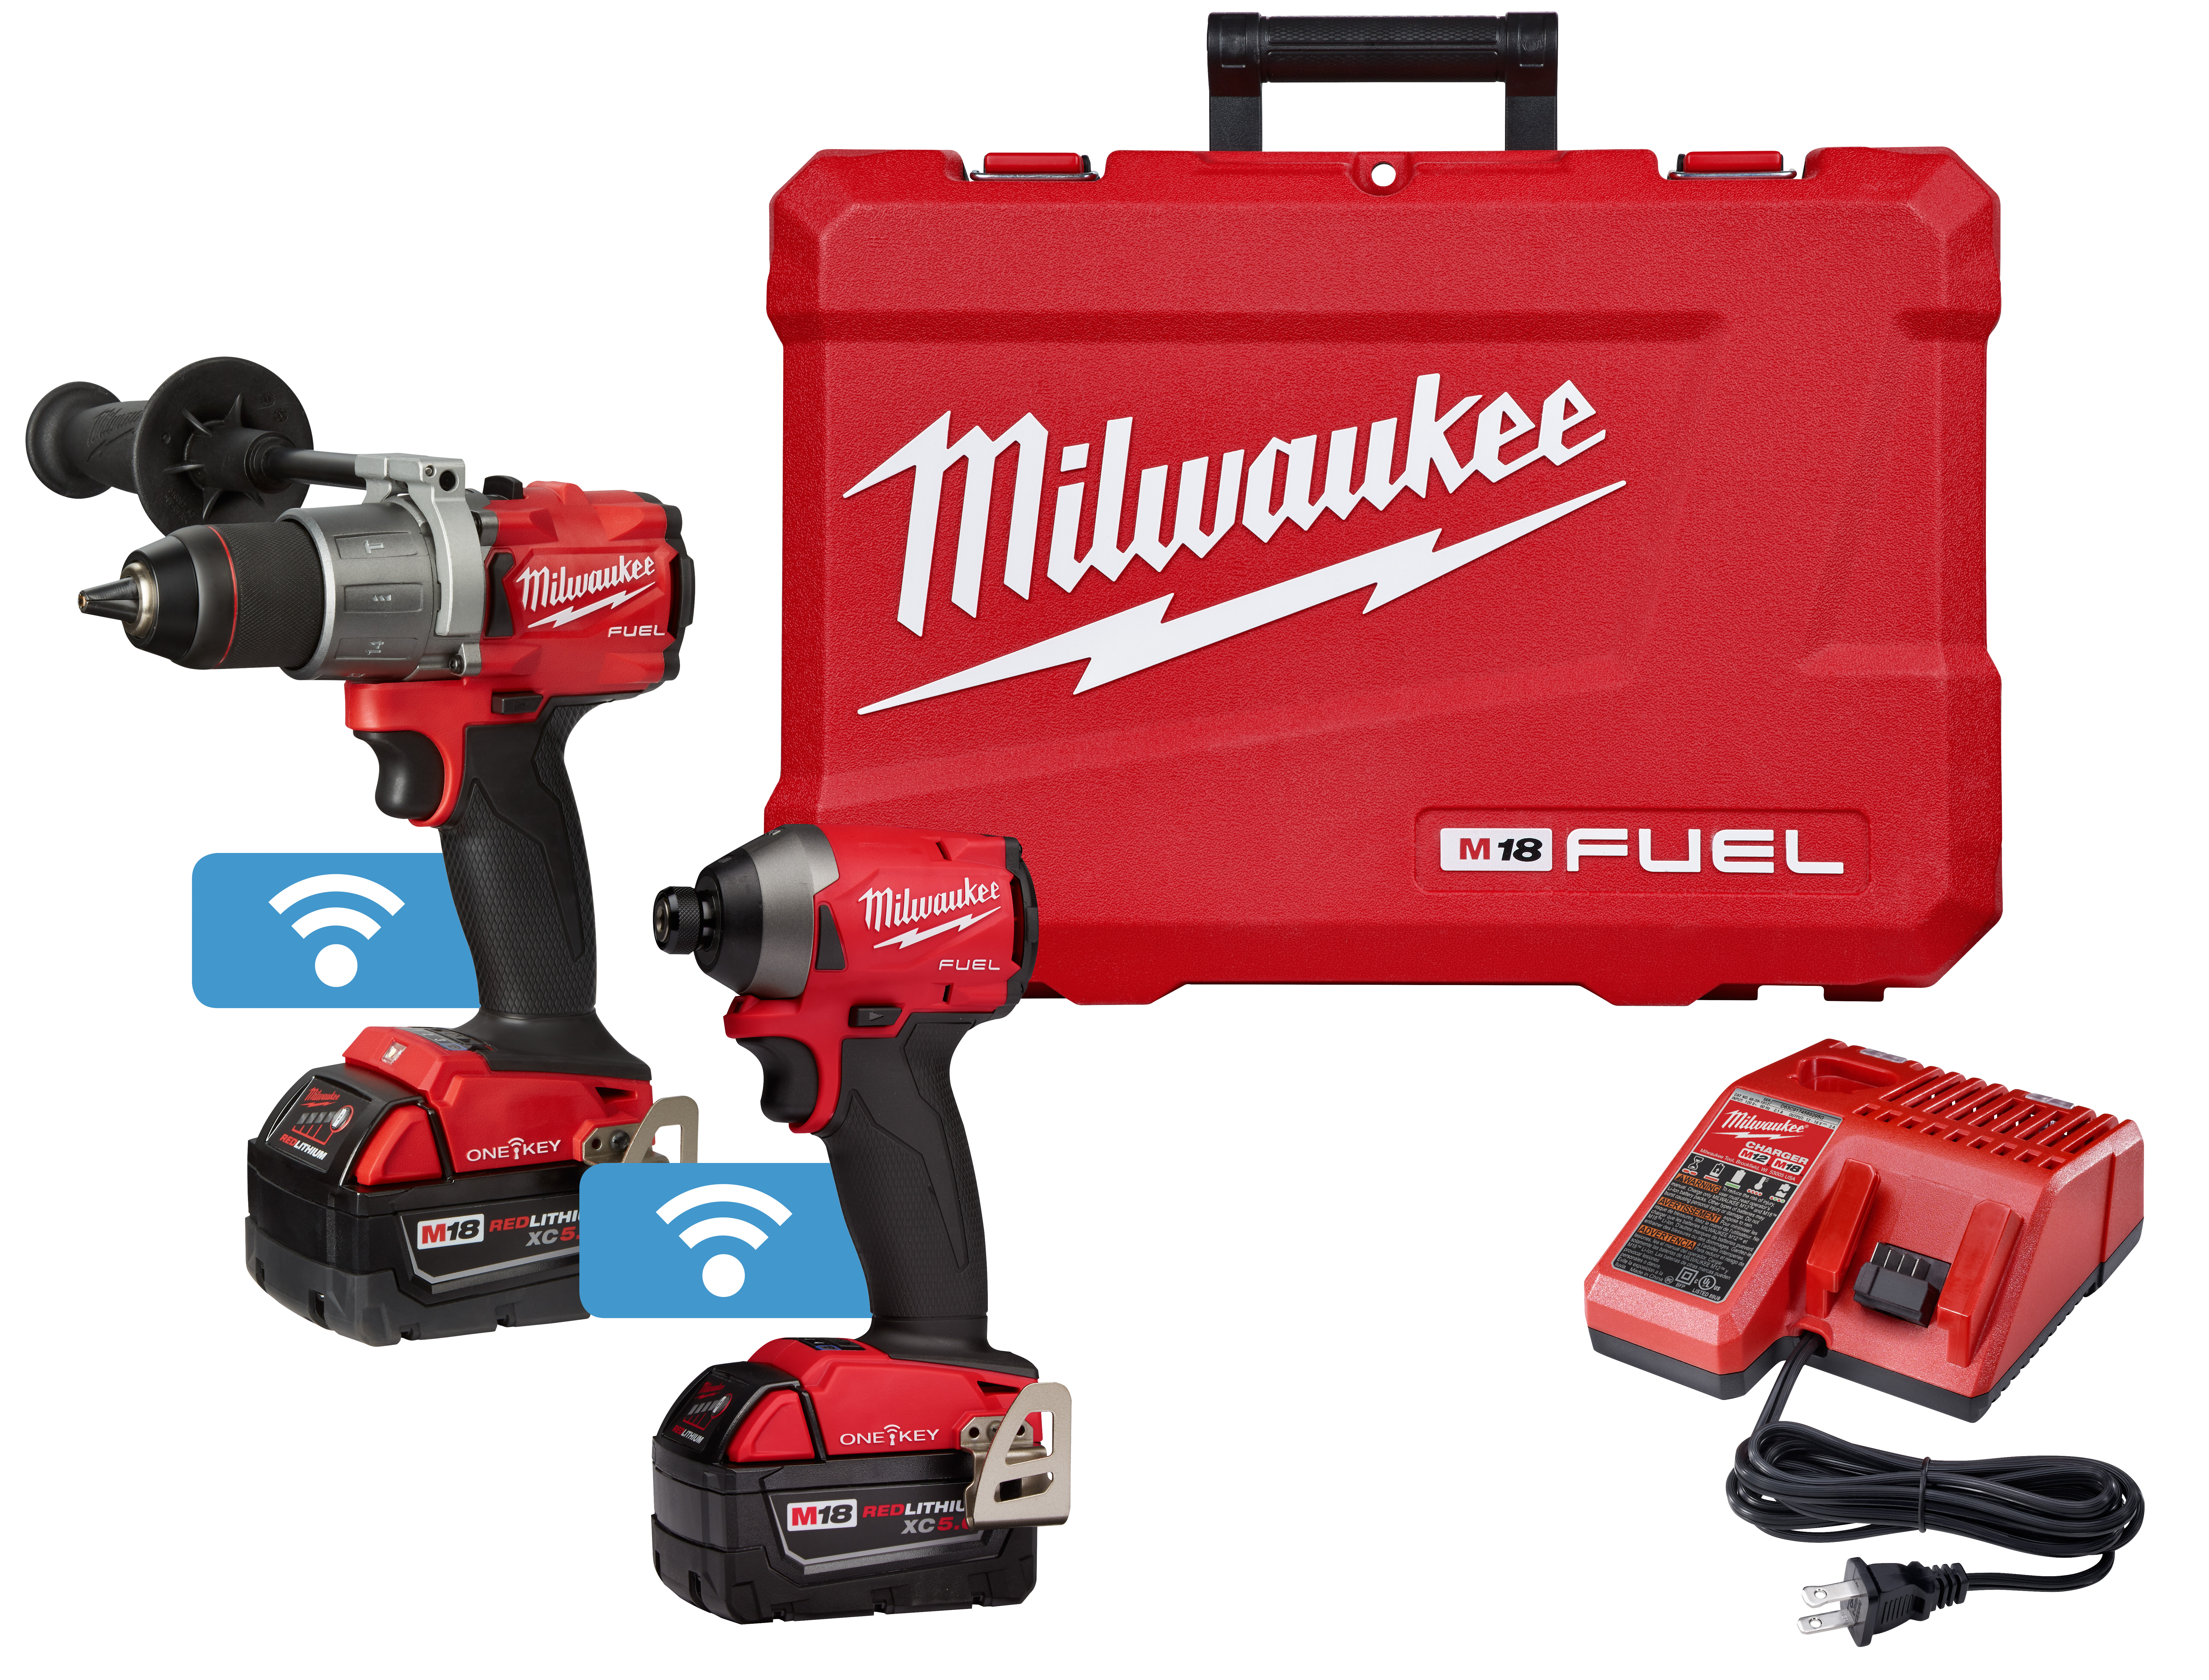 M18 FUEL ONE-KEY 18 Volt Lithium-Ion Brushless Cordless Hammer Drill/Impact Combo Kit